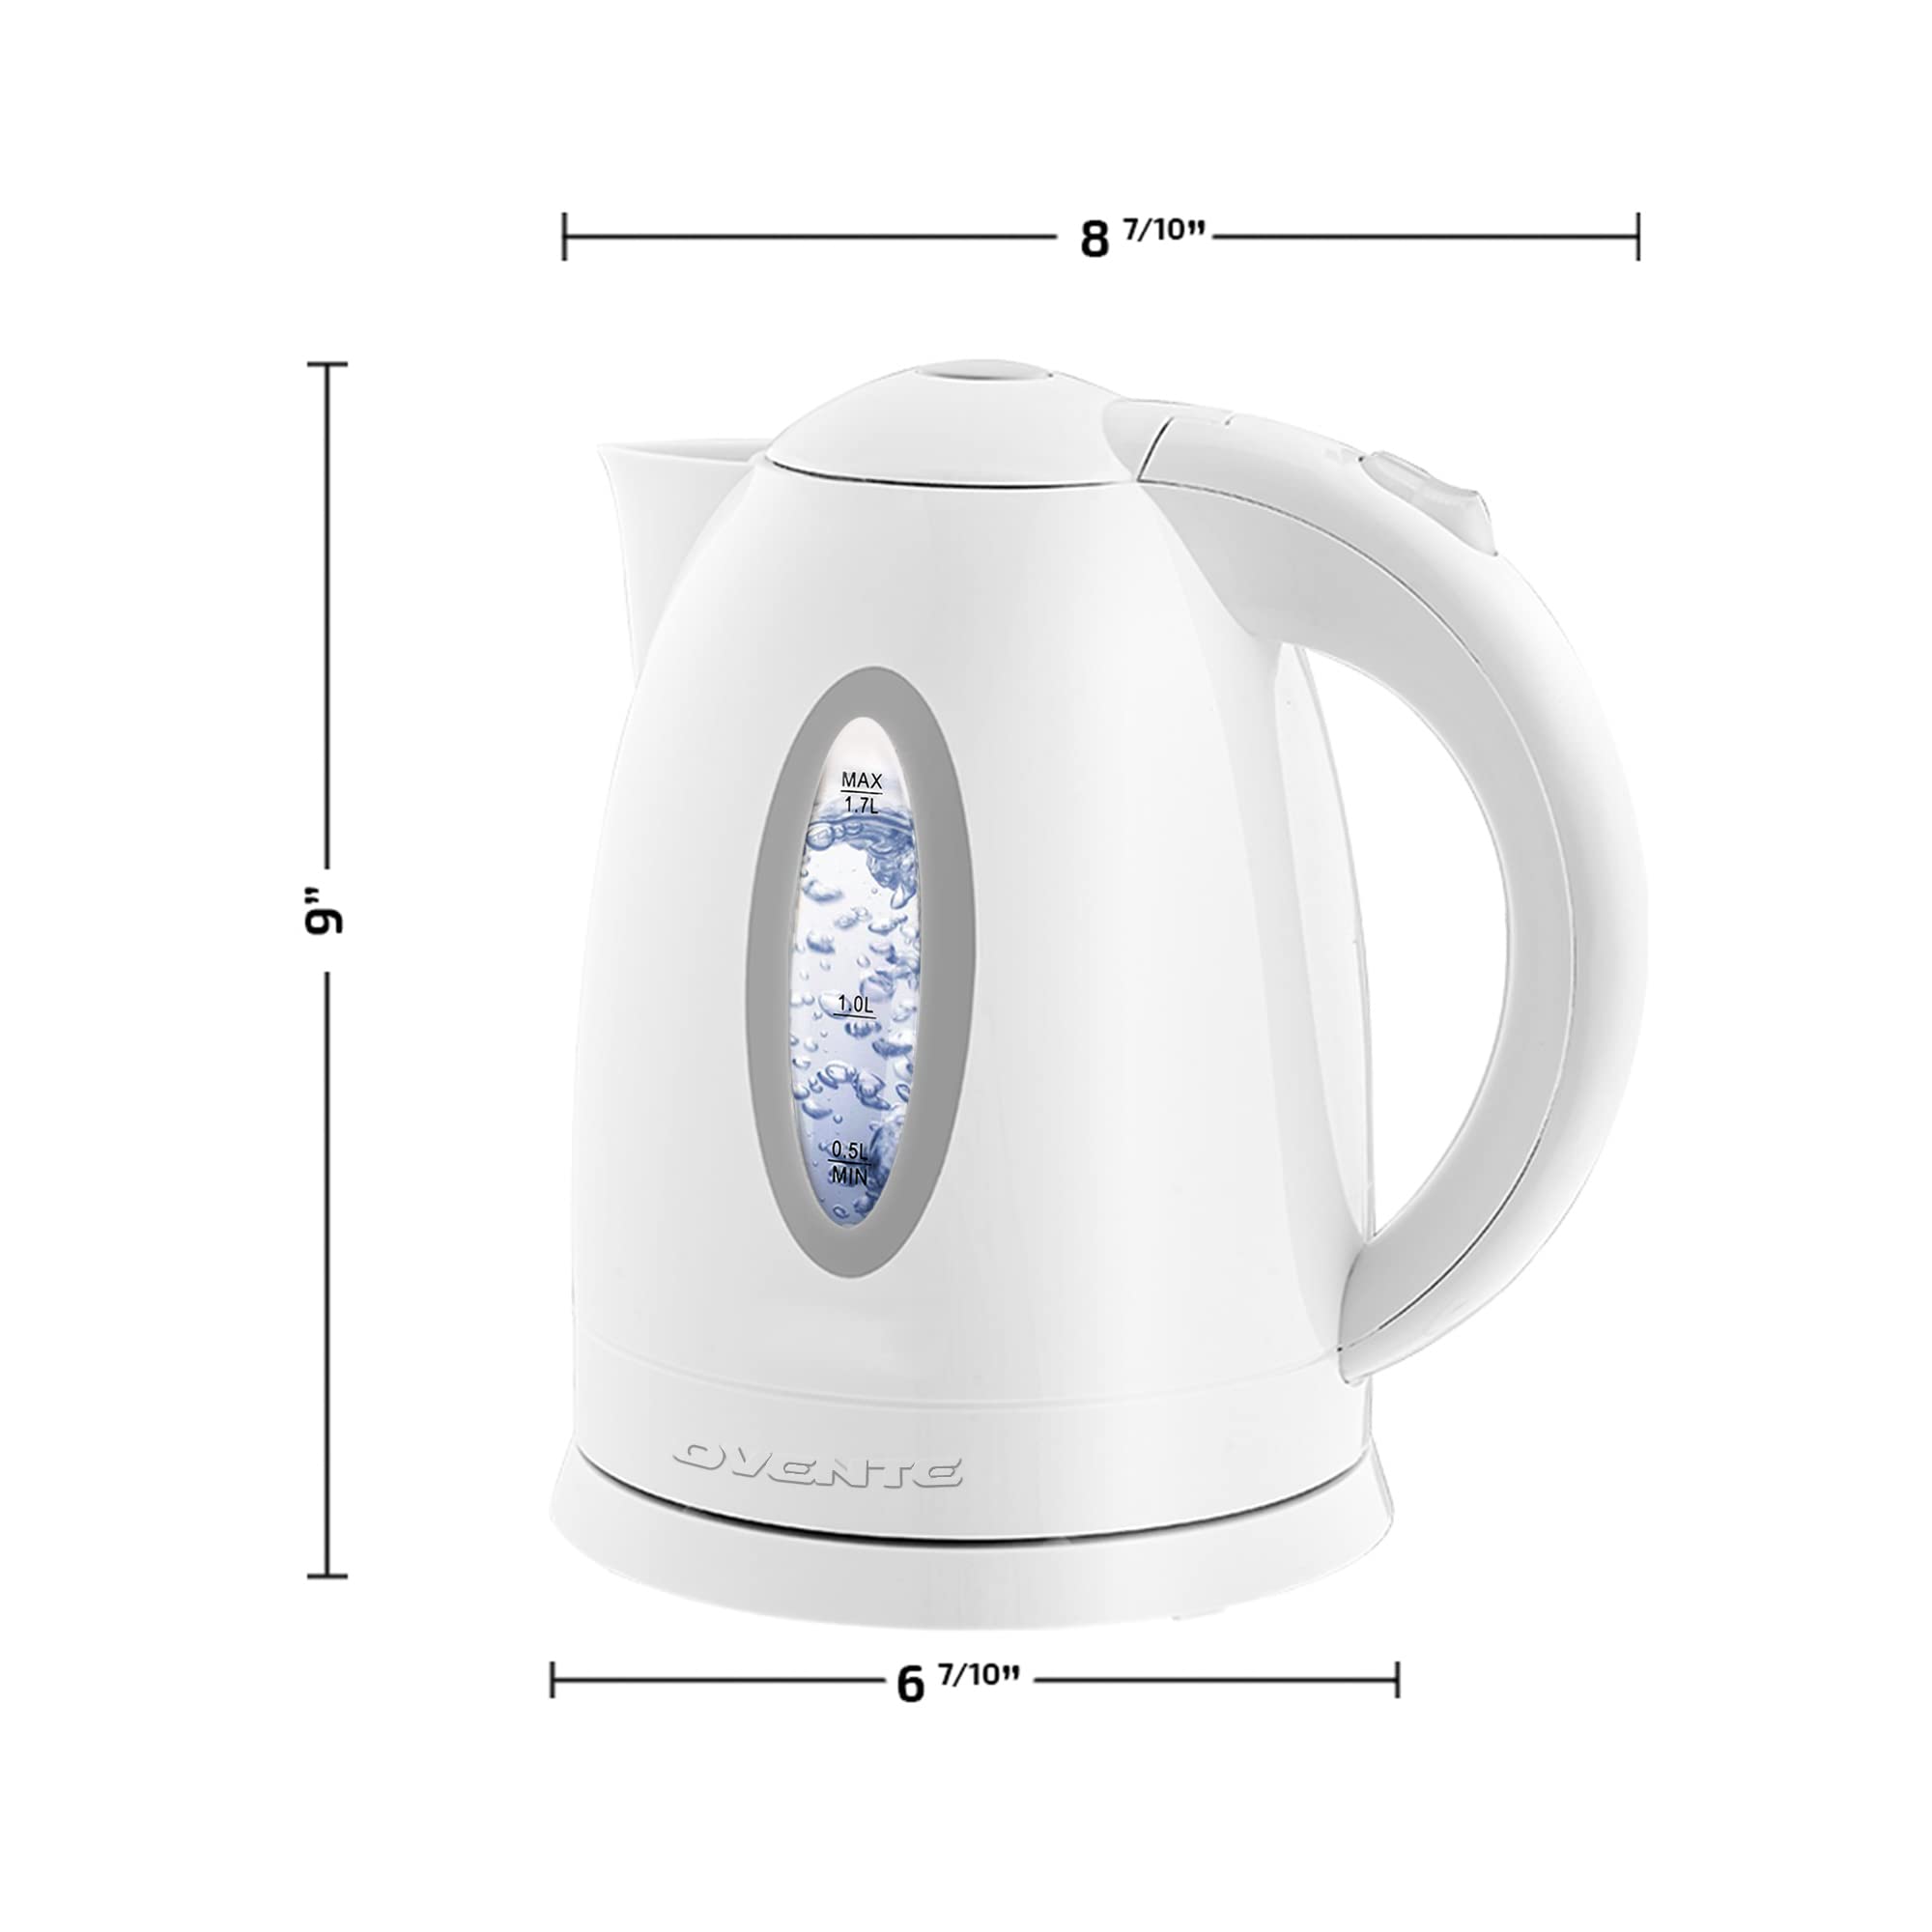 OVENTE Electric Kettle Hot Water Heater 1.7 Liter - BPA Free Fast Boiling Cordless Water Warmer - Auto Shut Off Instant Water Boiler for Coffee & Tea Pot - White KP72W